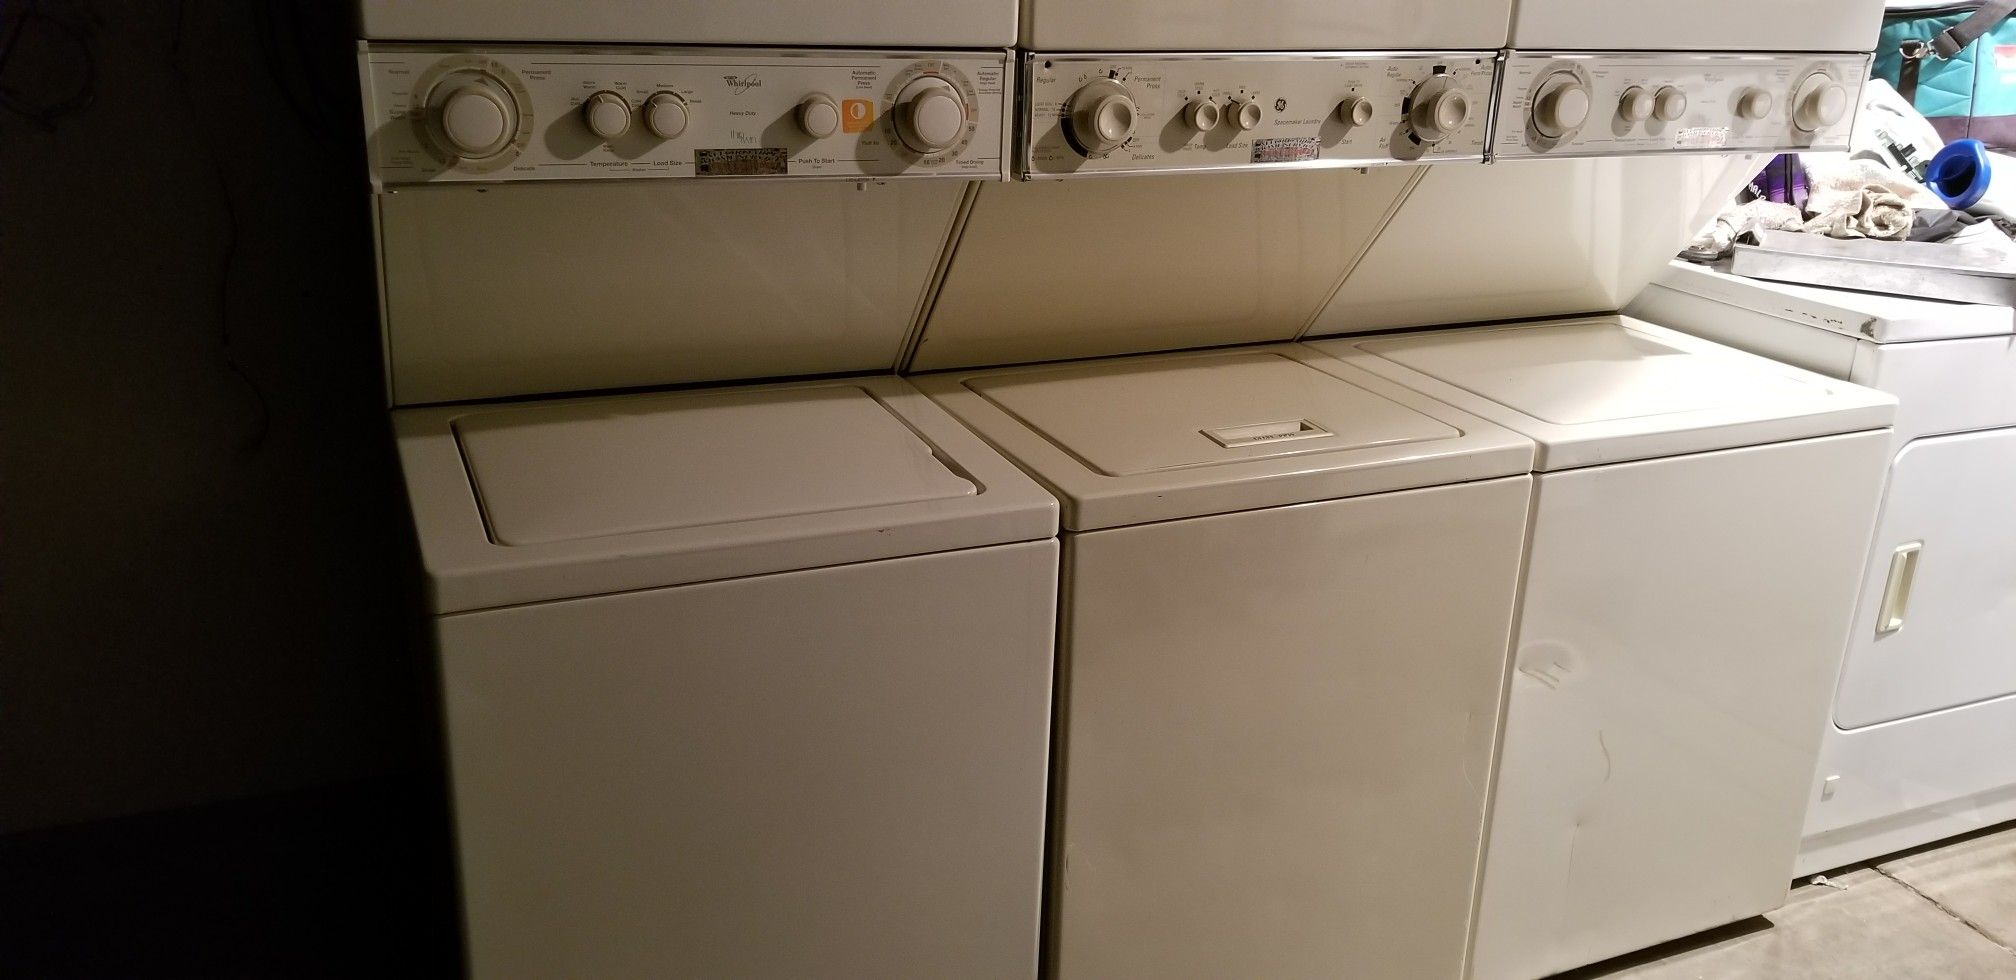 Stackable washer and dryer 4 sale.